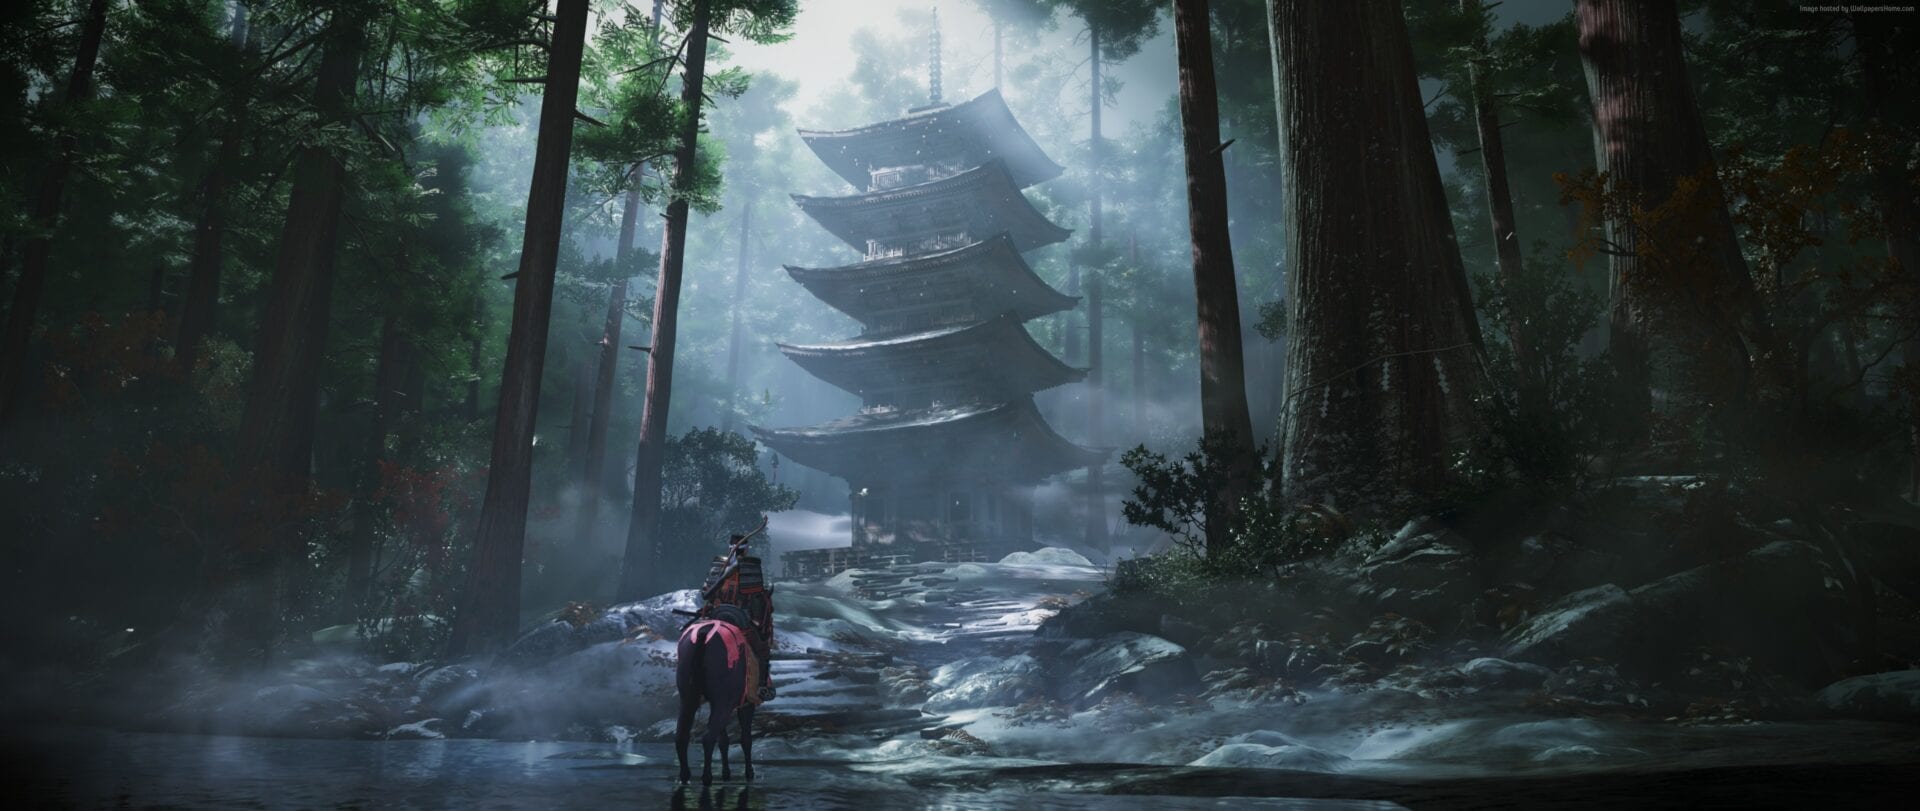 4K & HD Ghost of Tsushima Wallpaper You Need To Make Your Desktop Background